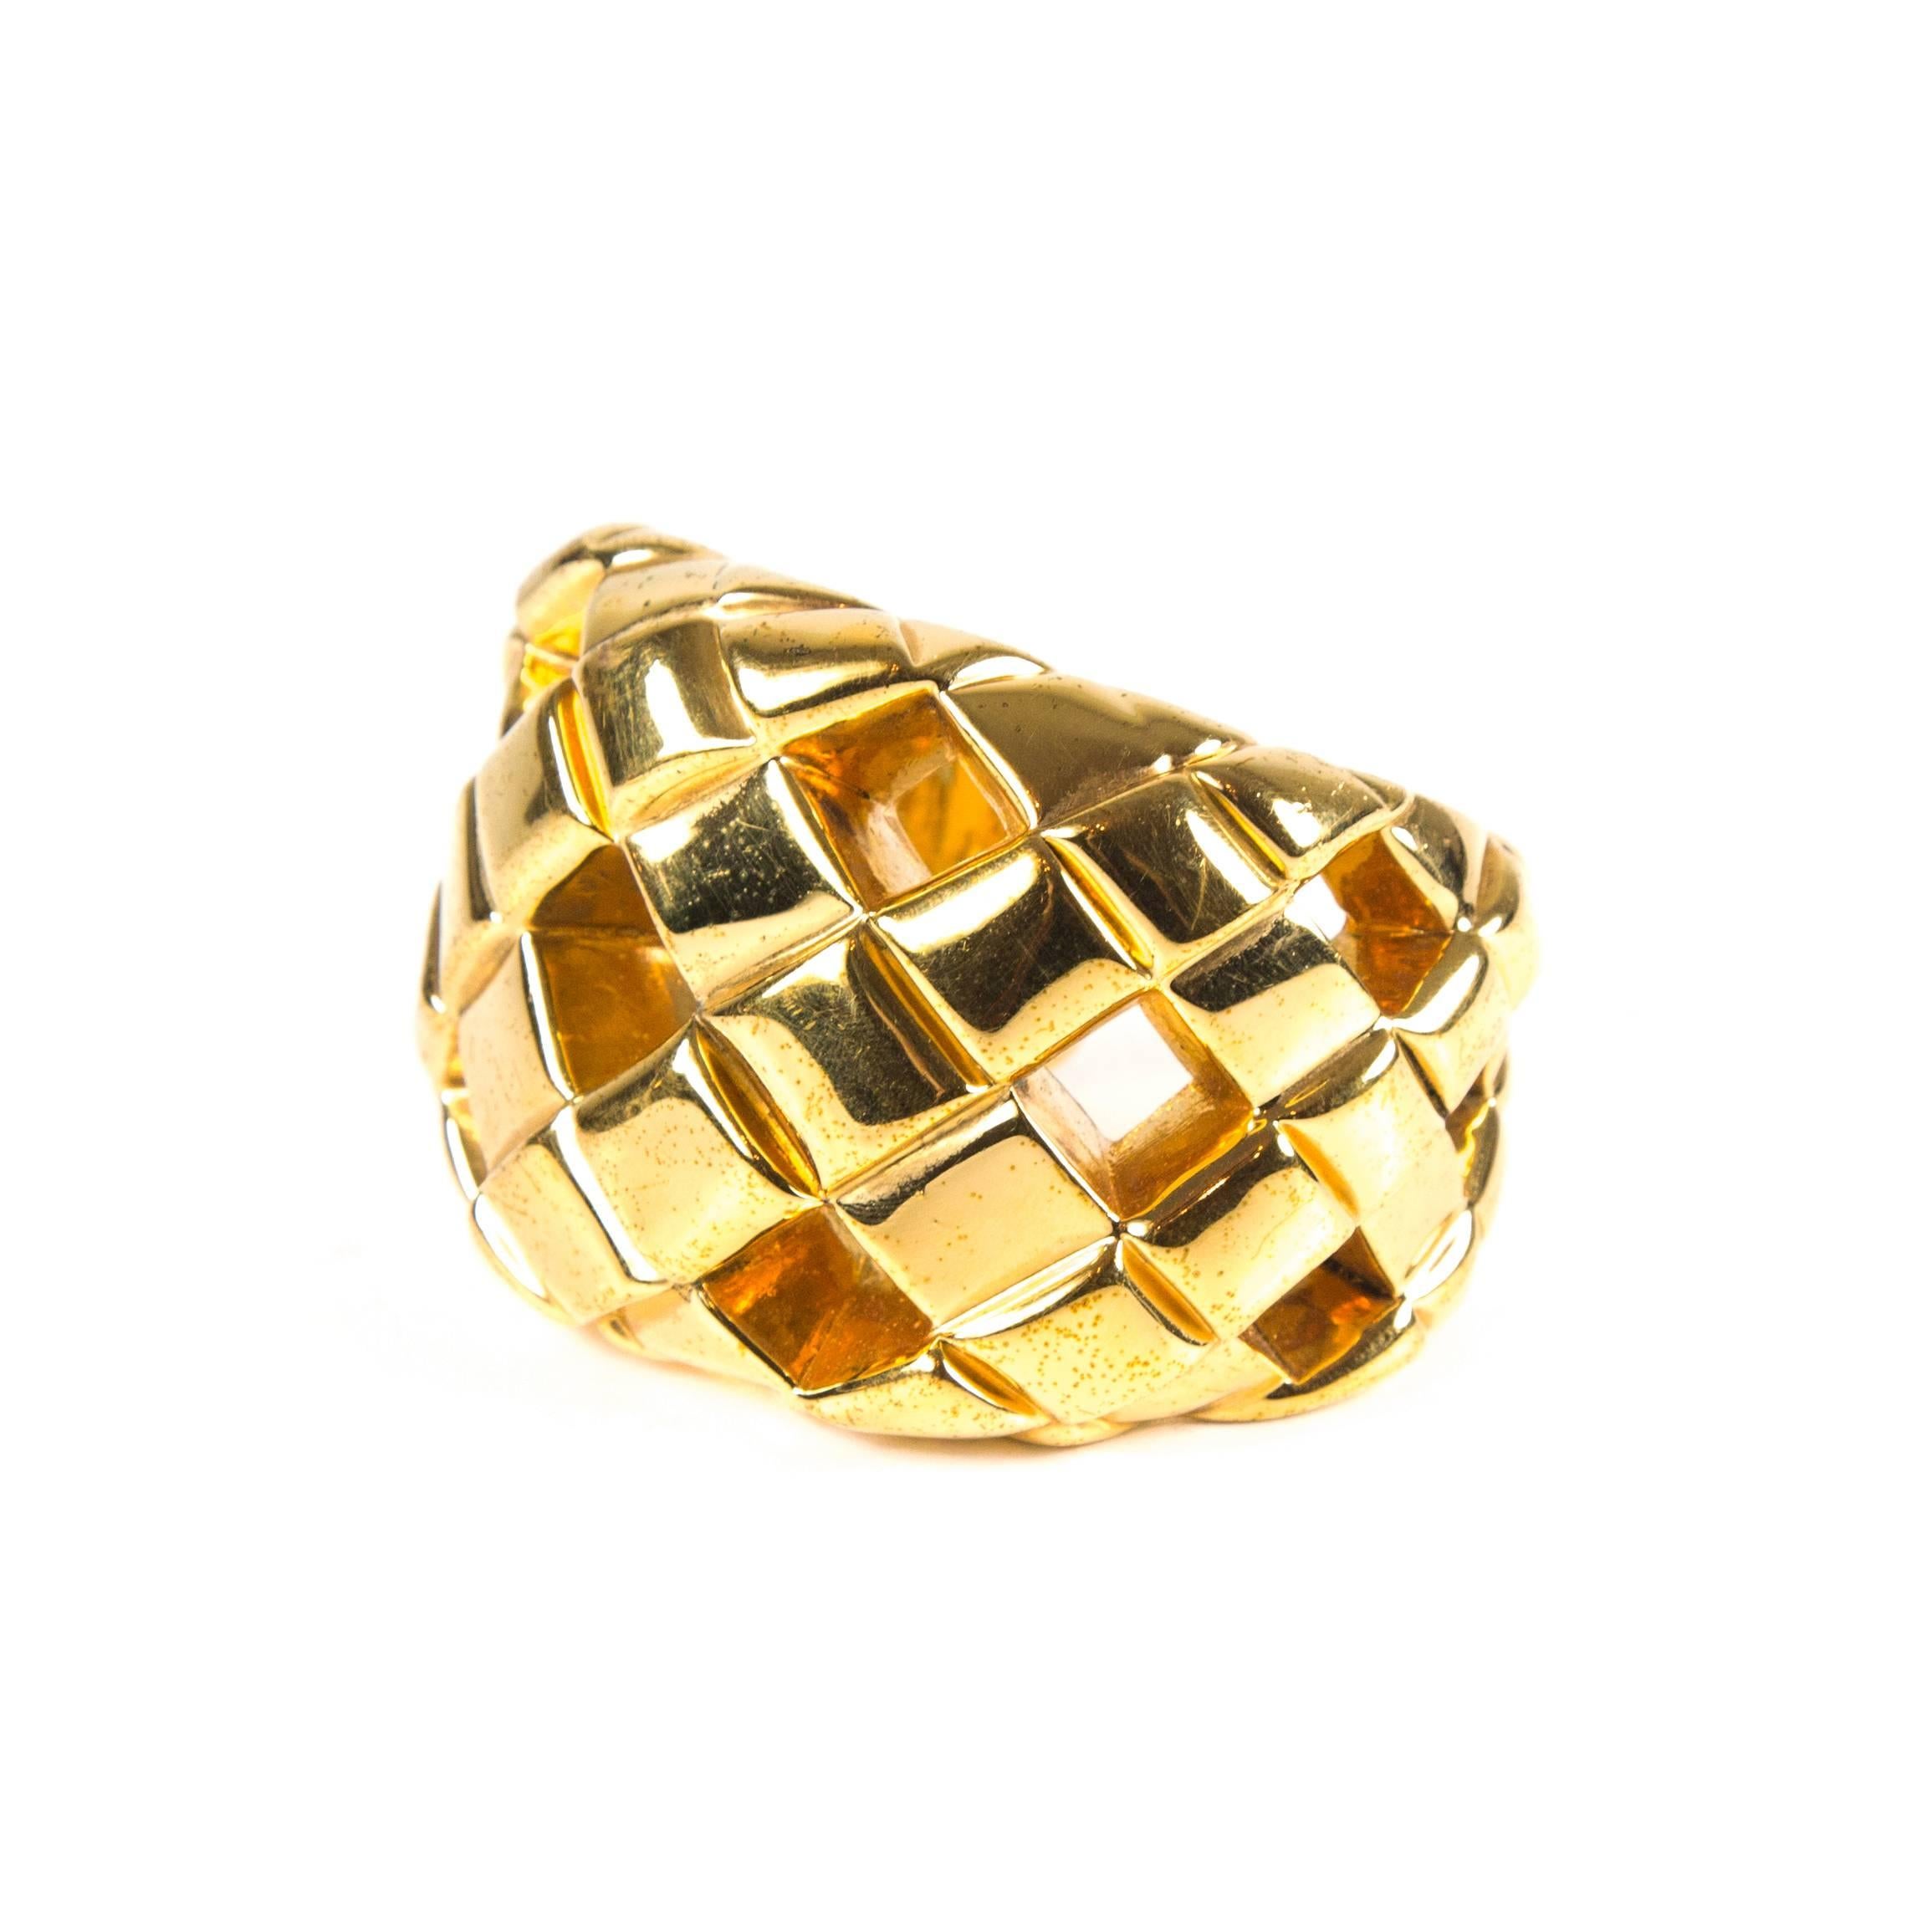 Chanel Rare Bracelet Cut Out Quilted Vintage Cuff - Gold Wide Bangle CC Woven 23 In Good Condition In Prahran, Victoria